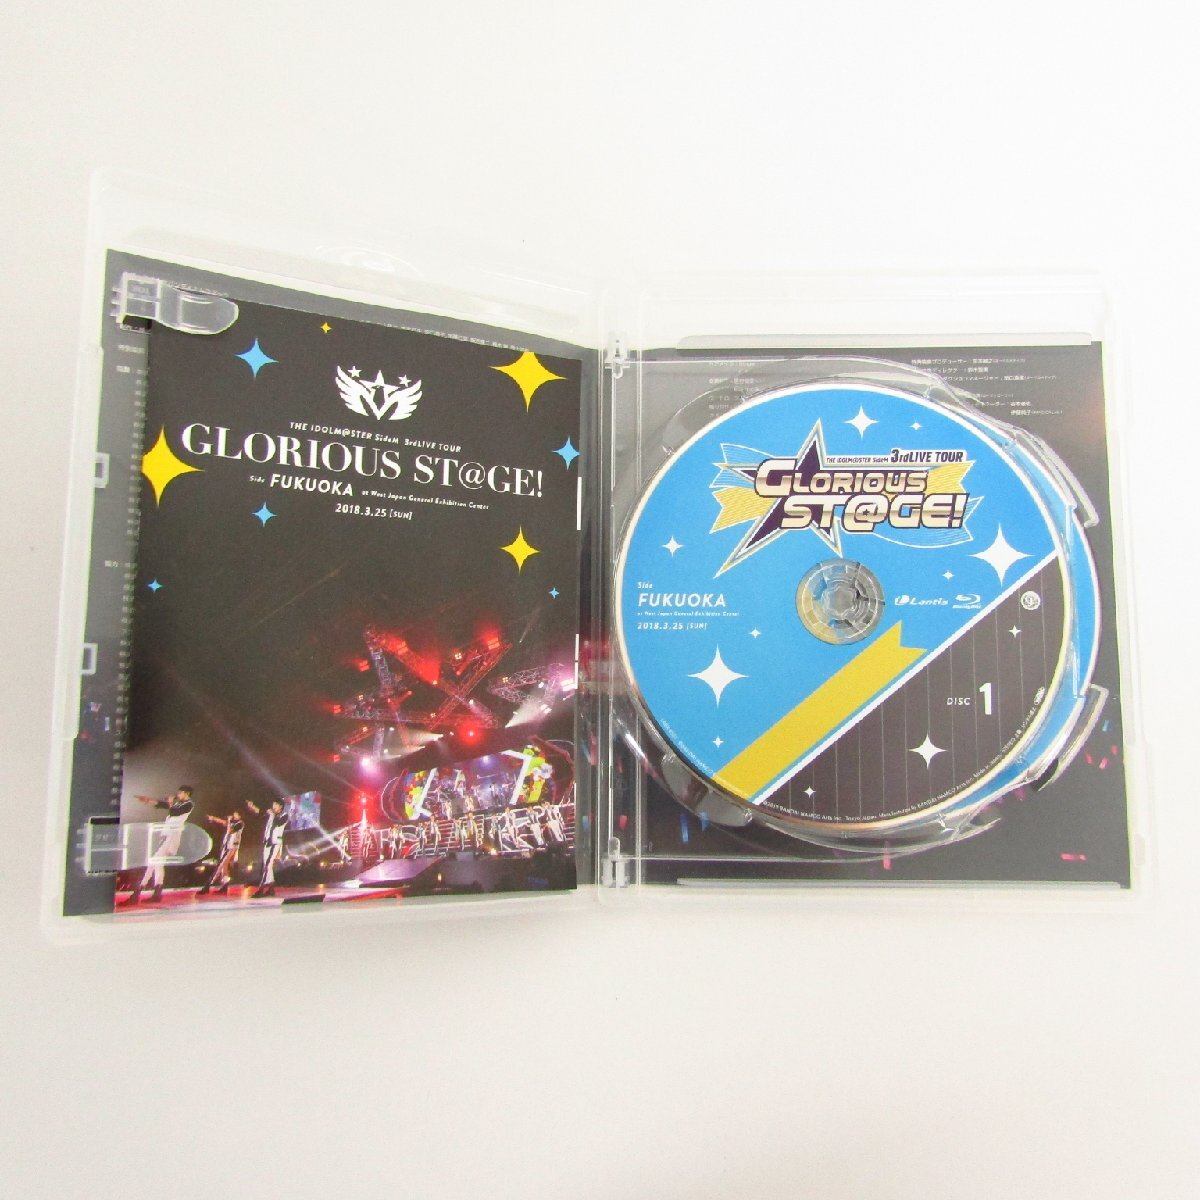 THE IDOLM@STER SideM 3rdLIVE TOUR ～GLORIOUS ST@GE!～ 幕張 / 福岡 / 静岡 LIVE Blu-ray まとめ セット 〓A1115_画像8